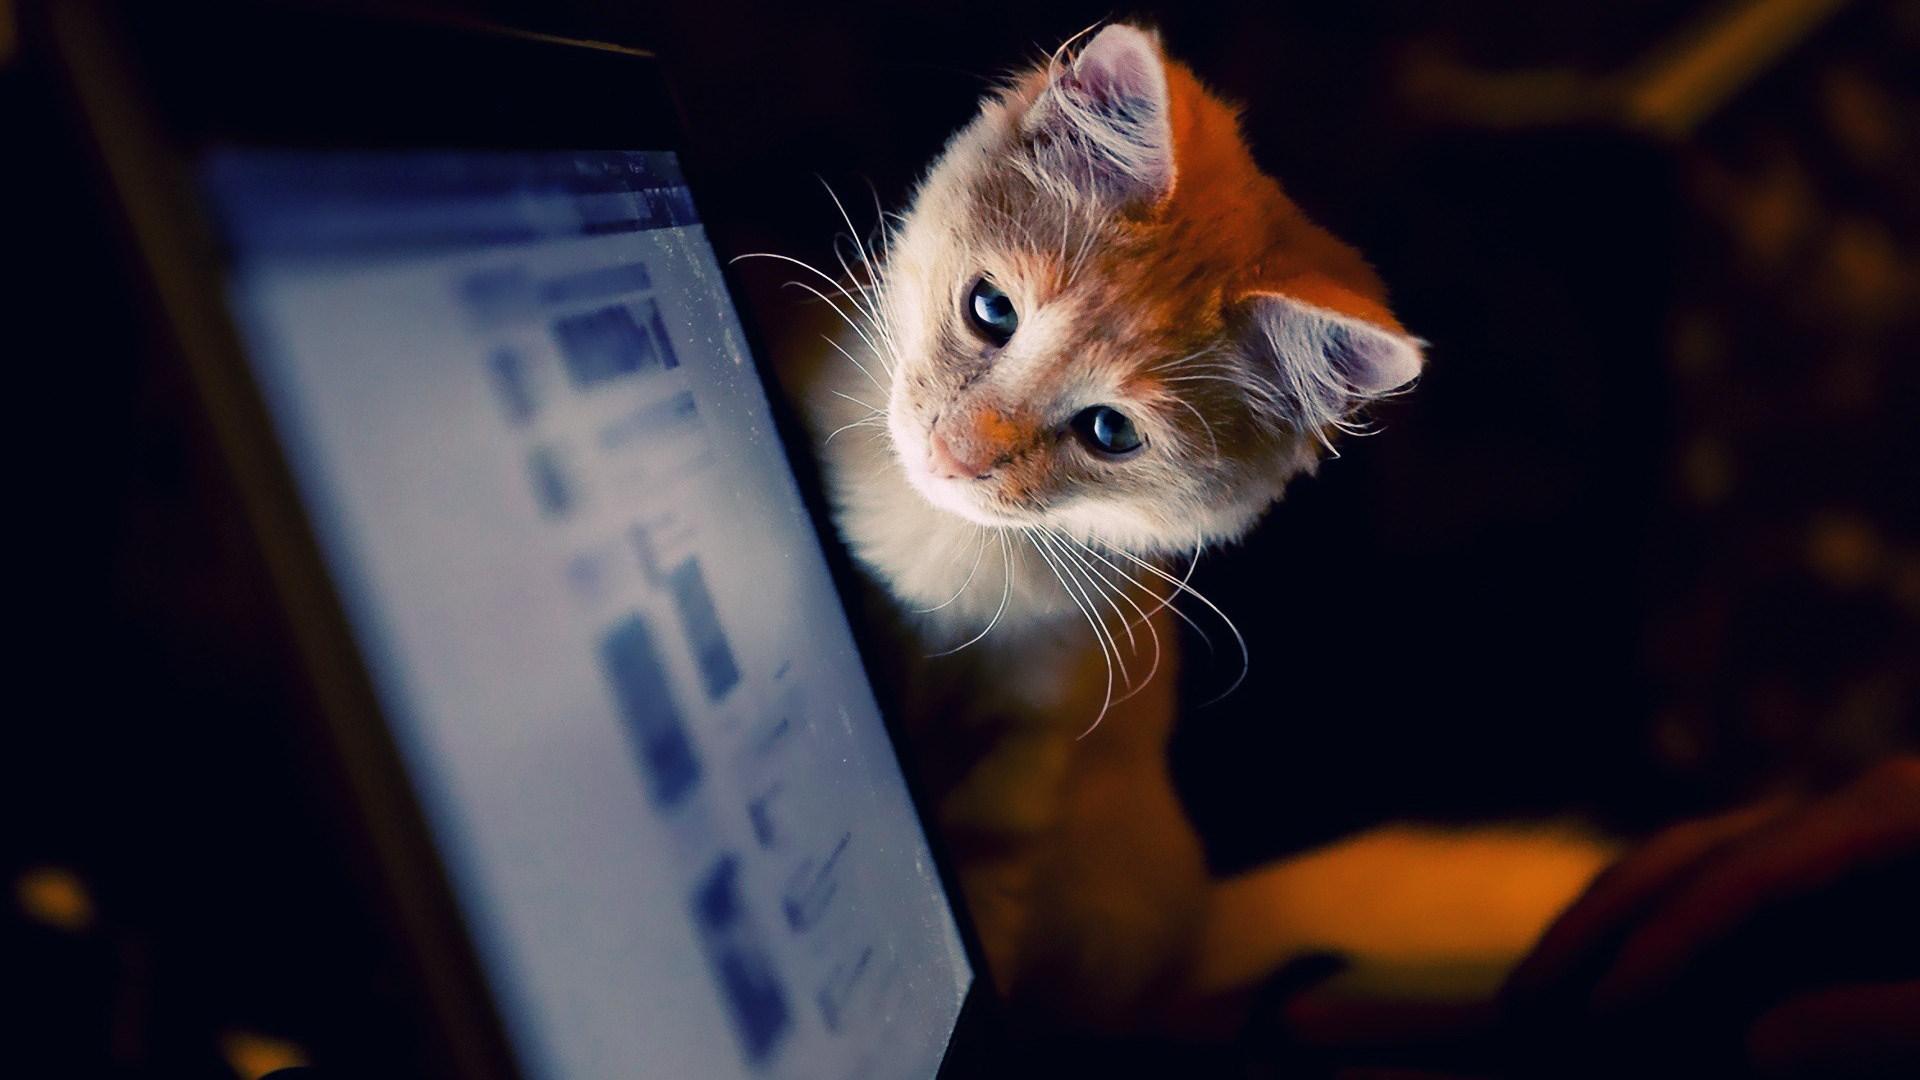 Wallpaper Cute Cats And Computers HD Widescreen X Litle With Of